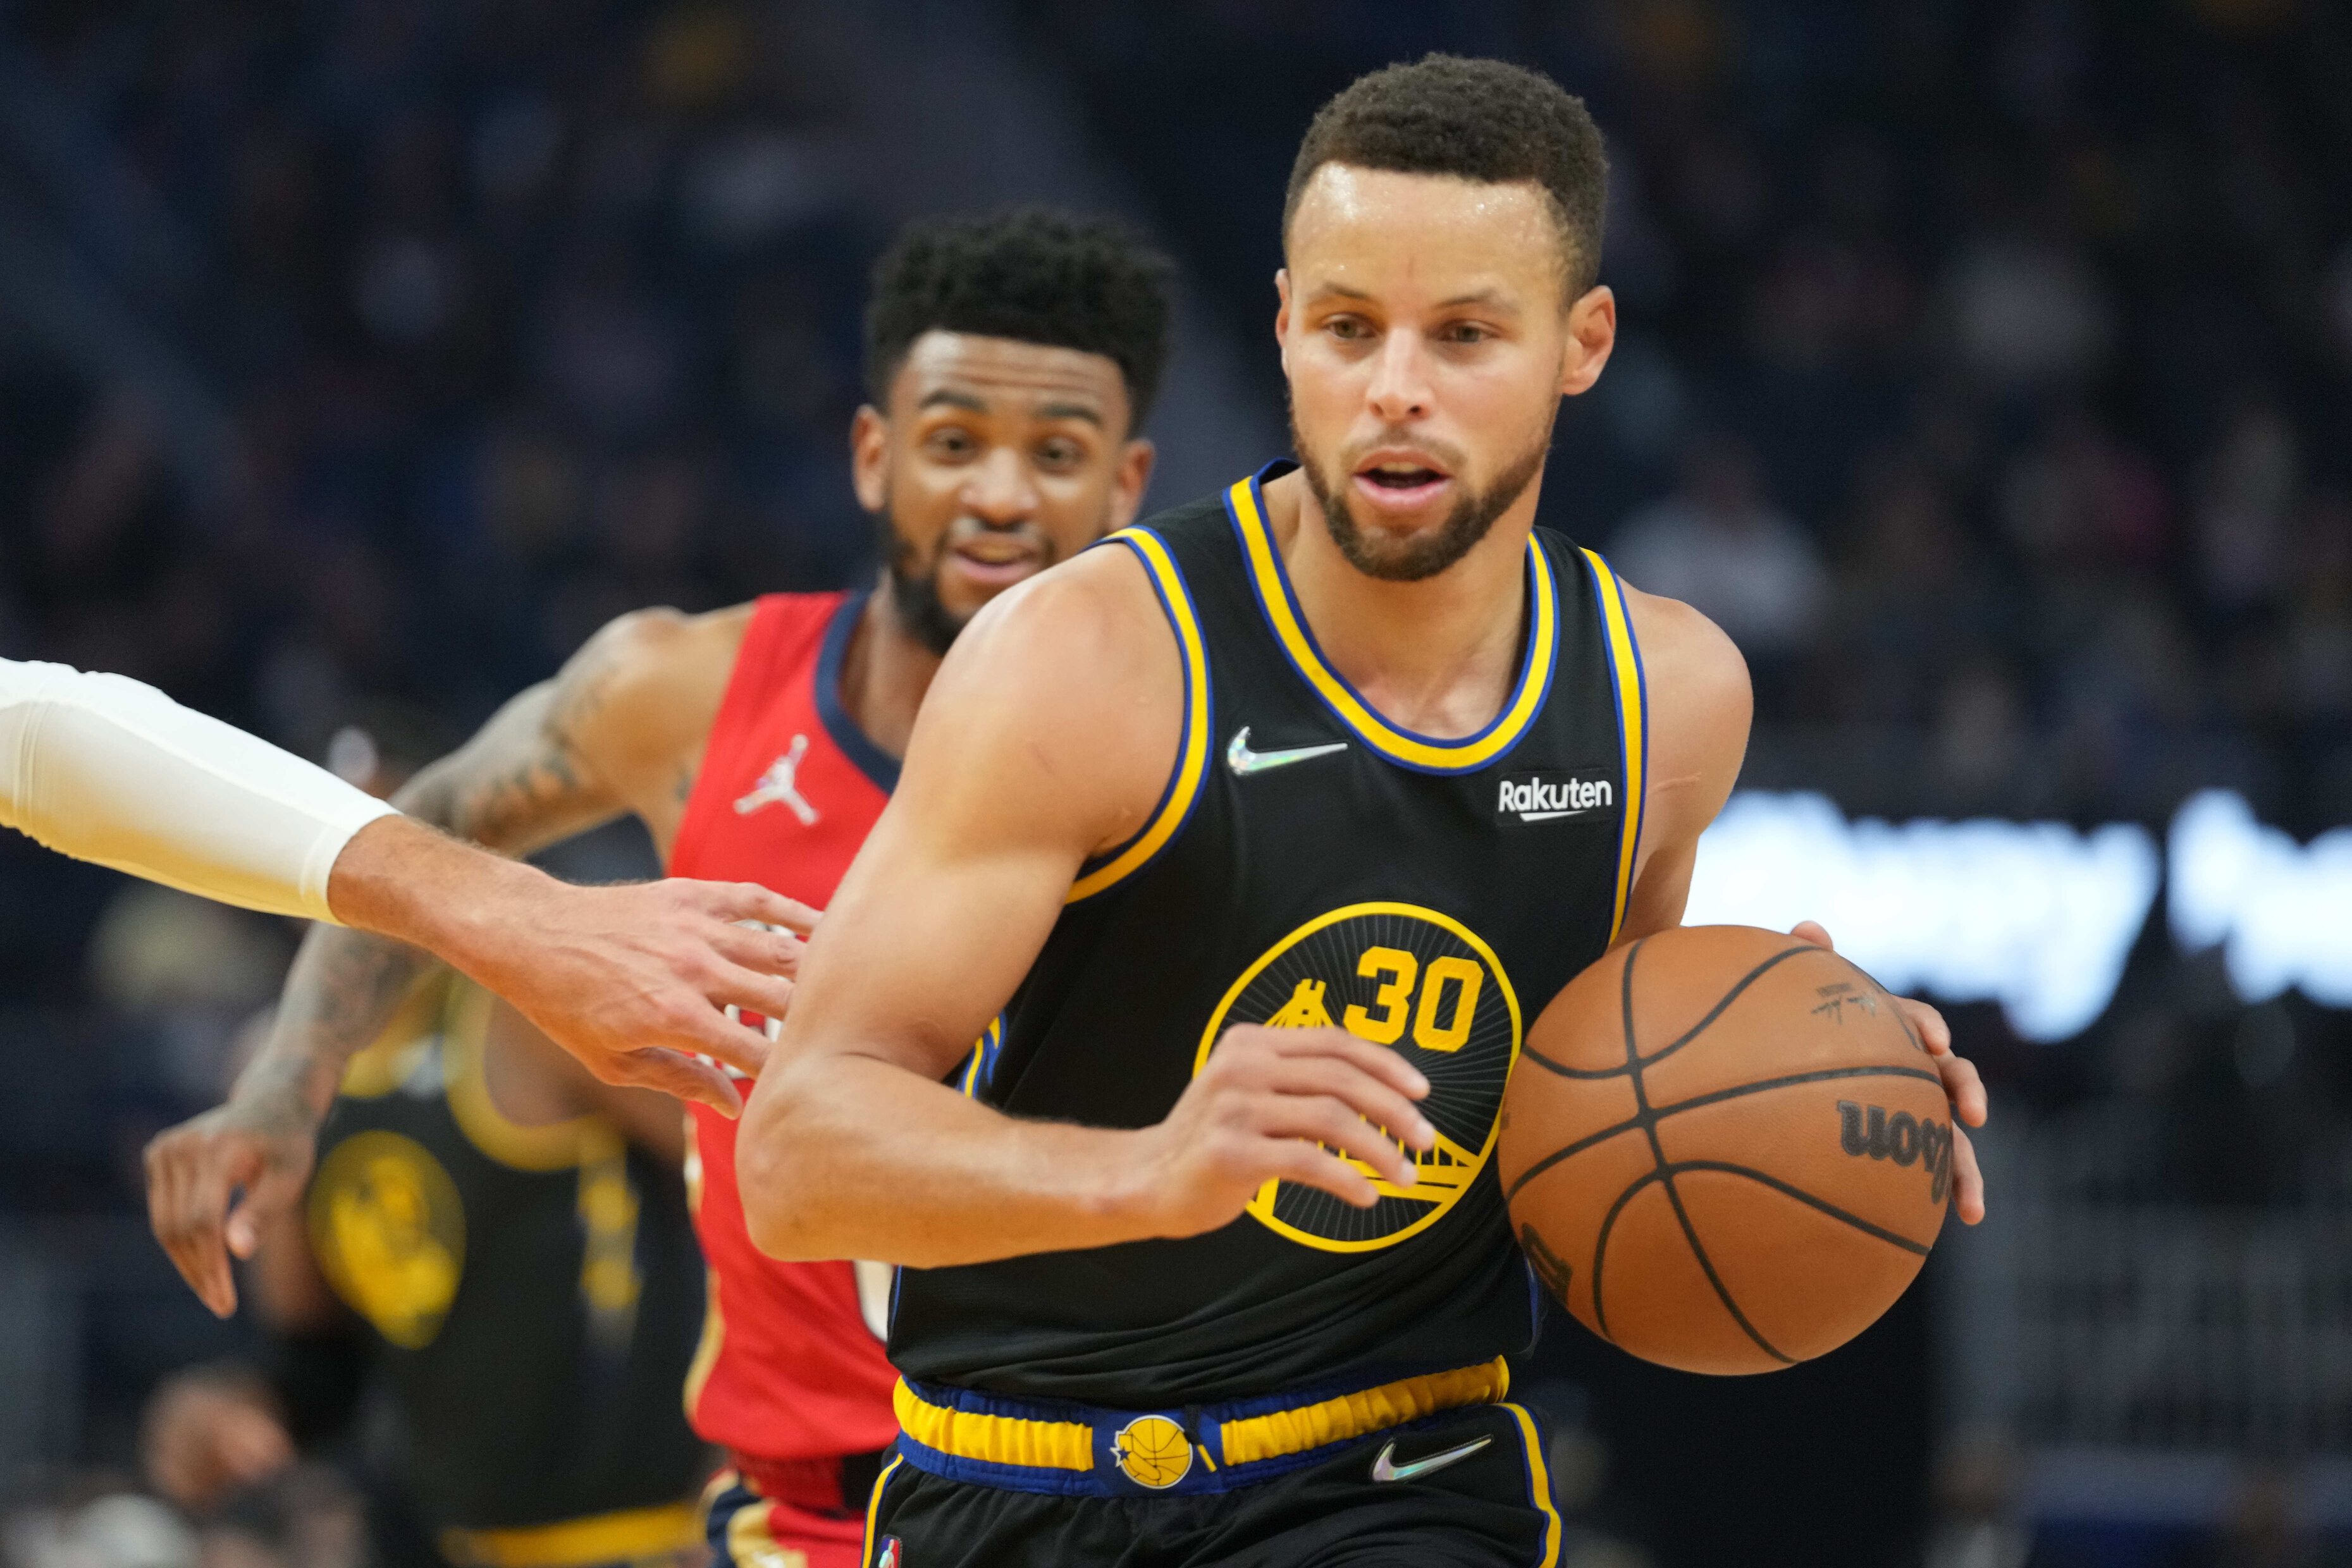 Steph Curry continues hot start in Warriors' win over Pelicans